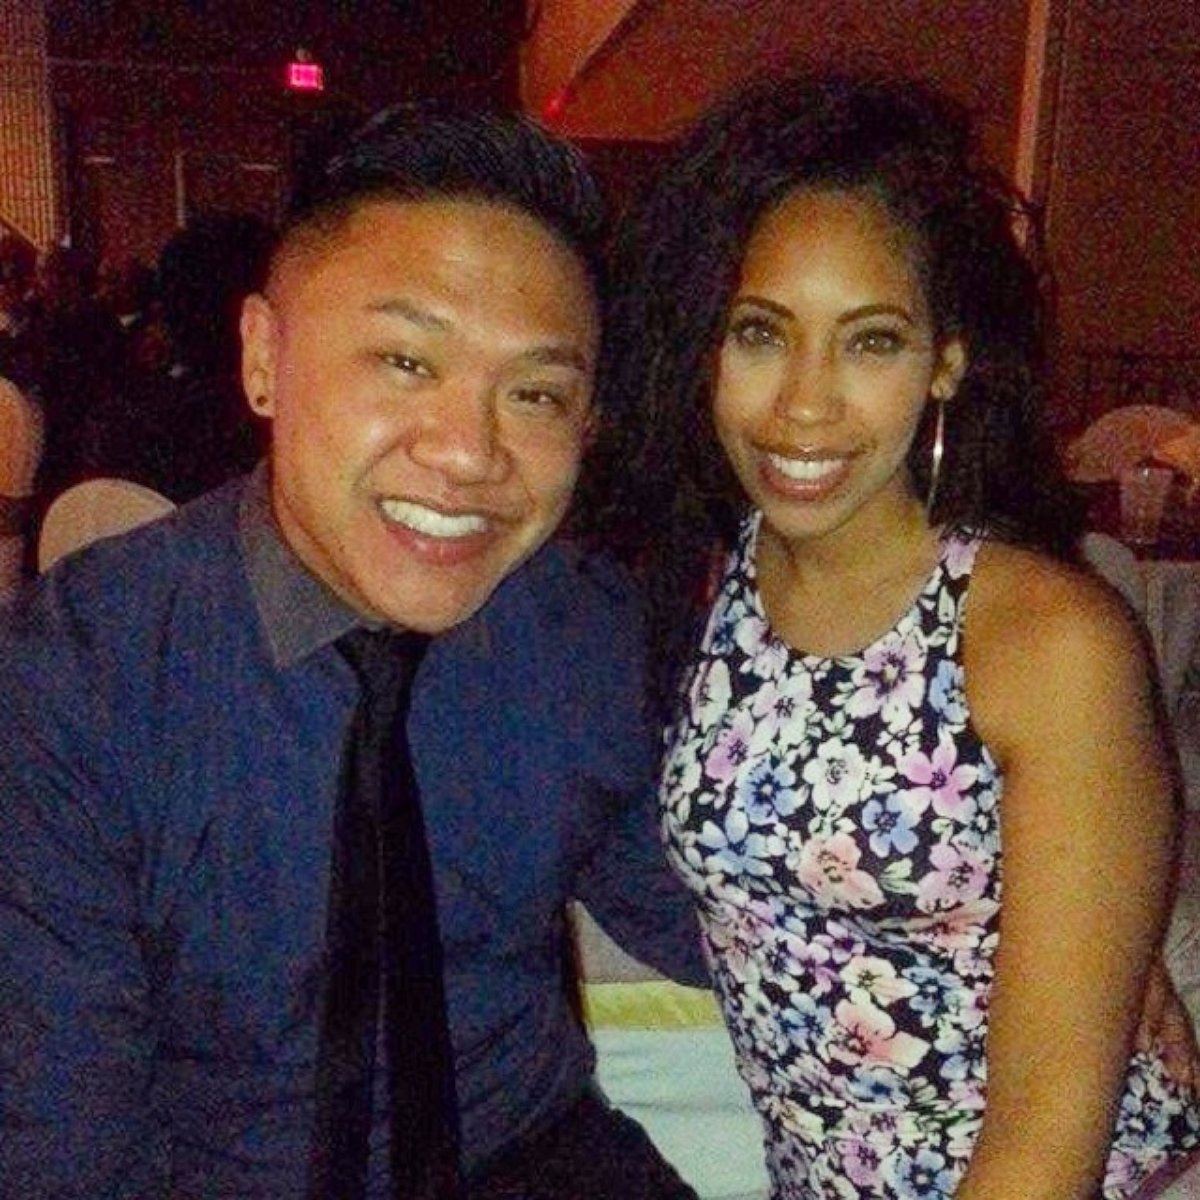 Tim Delaghetto is pictured with his girlfriend, Chia, in this photo posted to Instagram on July 23, 2014.